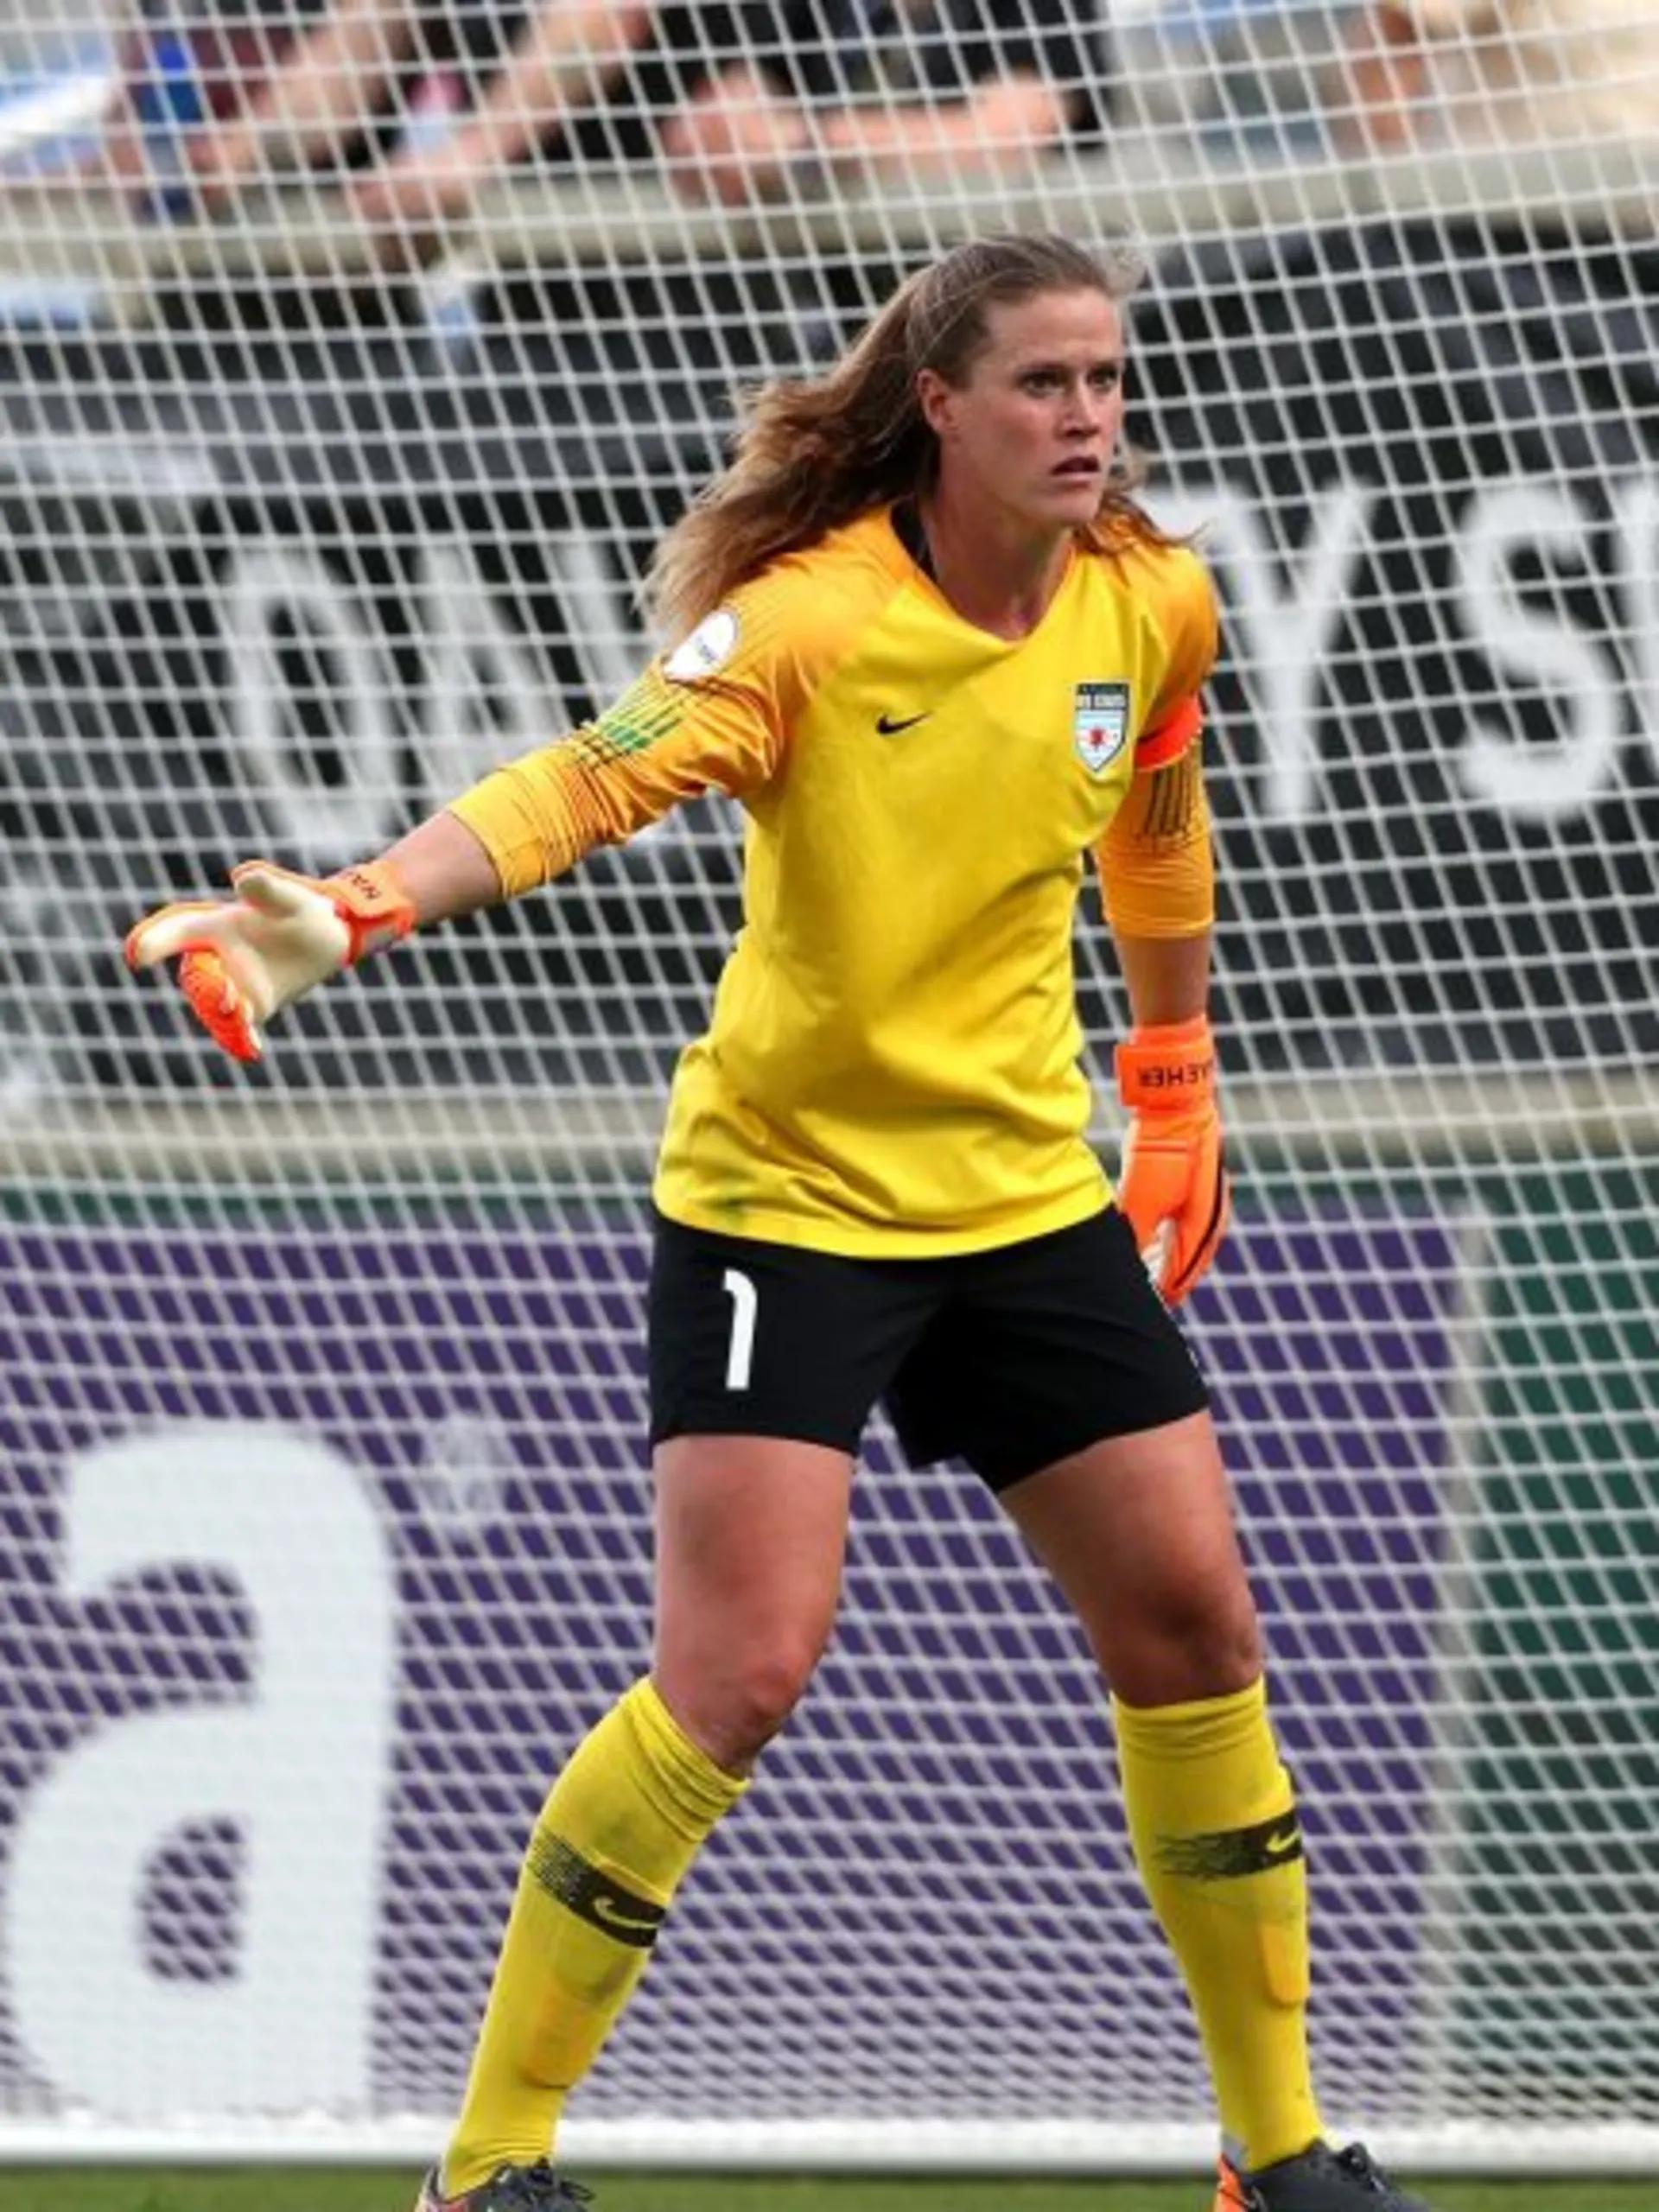 story-image-player-of-the-week-alyssa-naeher